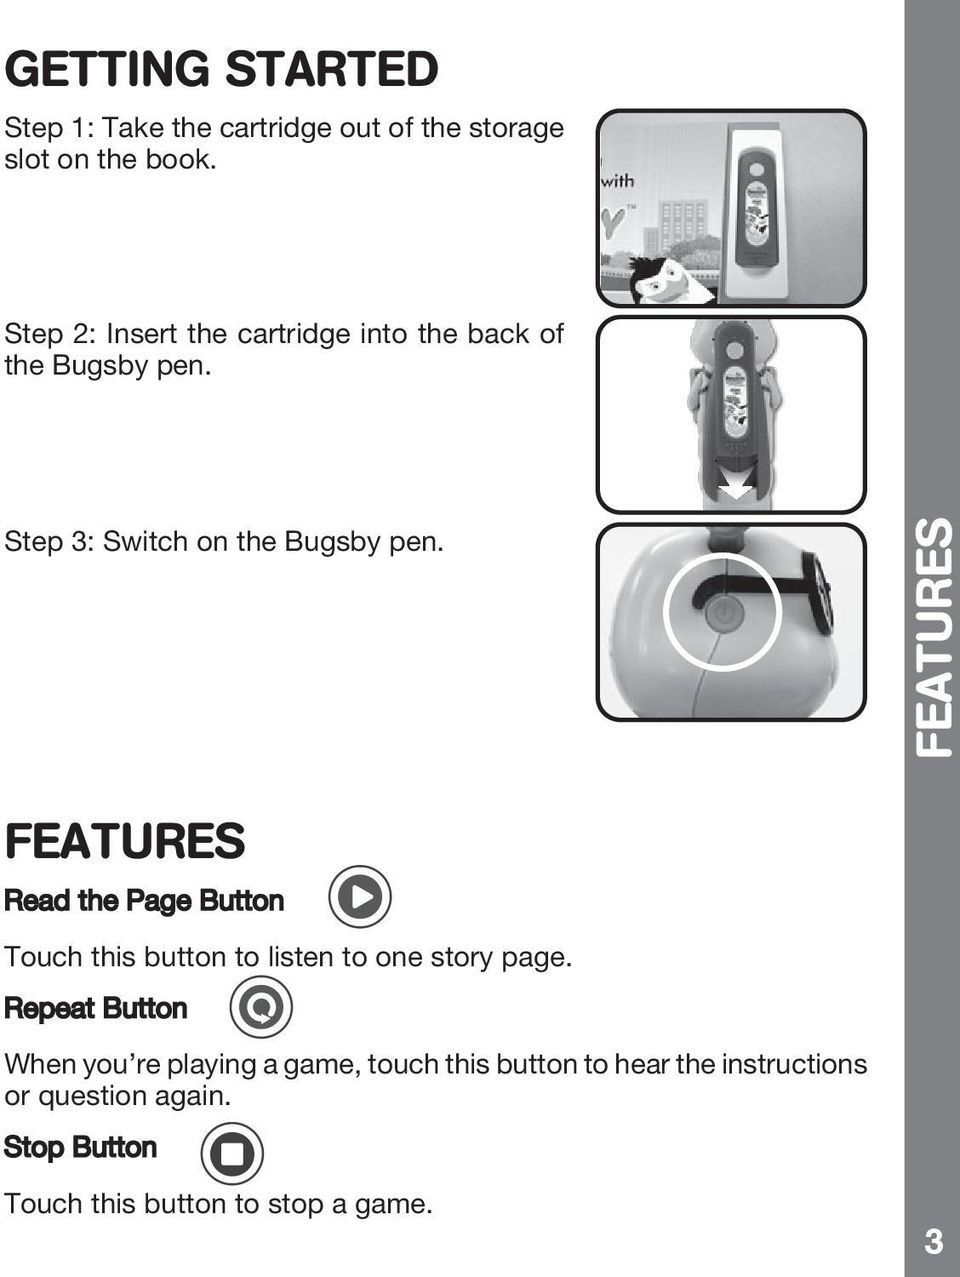 FEATURES FEATURES Read the Page Button Touch this button to listen to one story page.